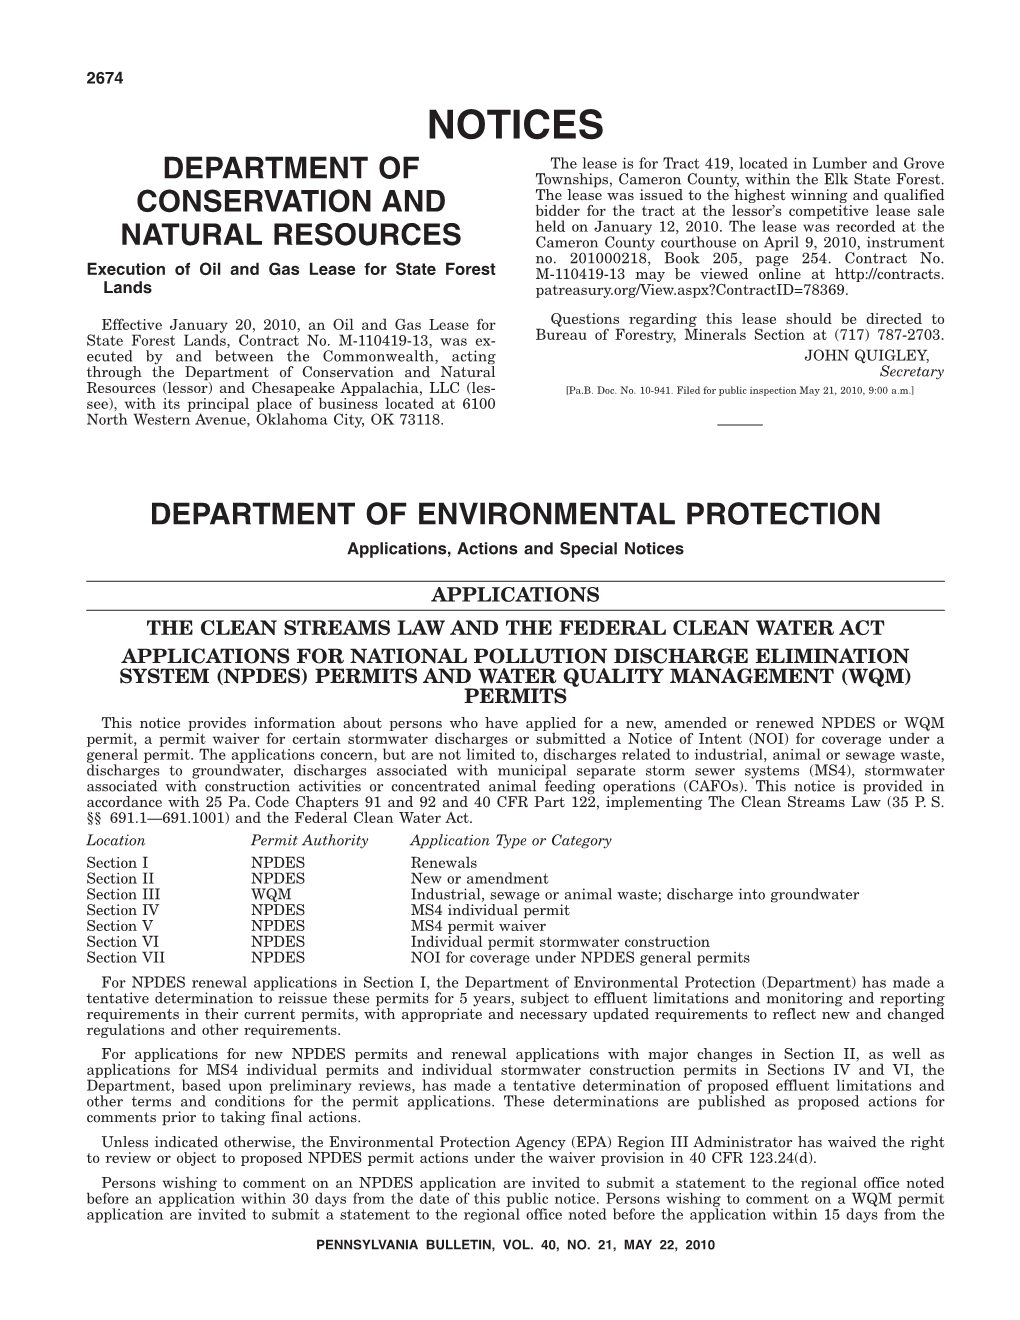 DEPARTMENT of ENVIRONMENTAL PROTECTION Applications, Actions and Special Notices